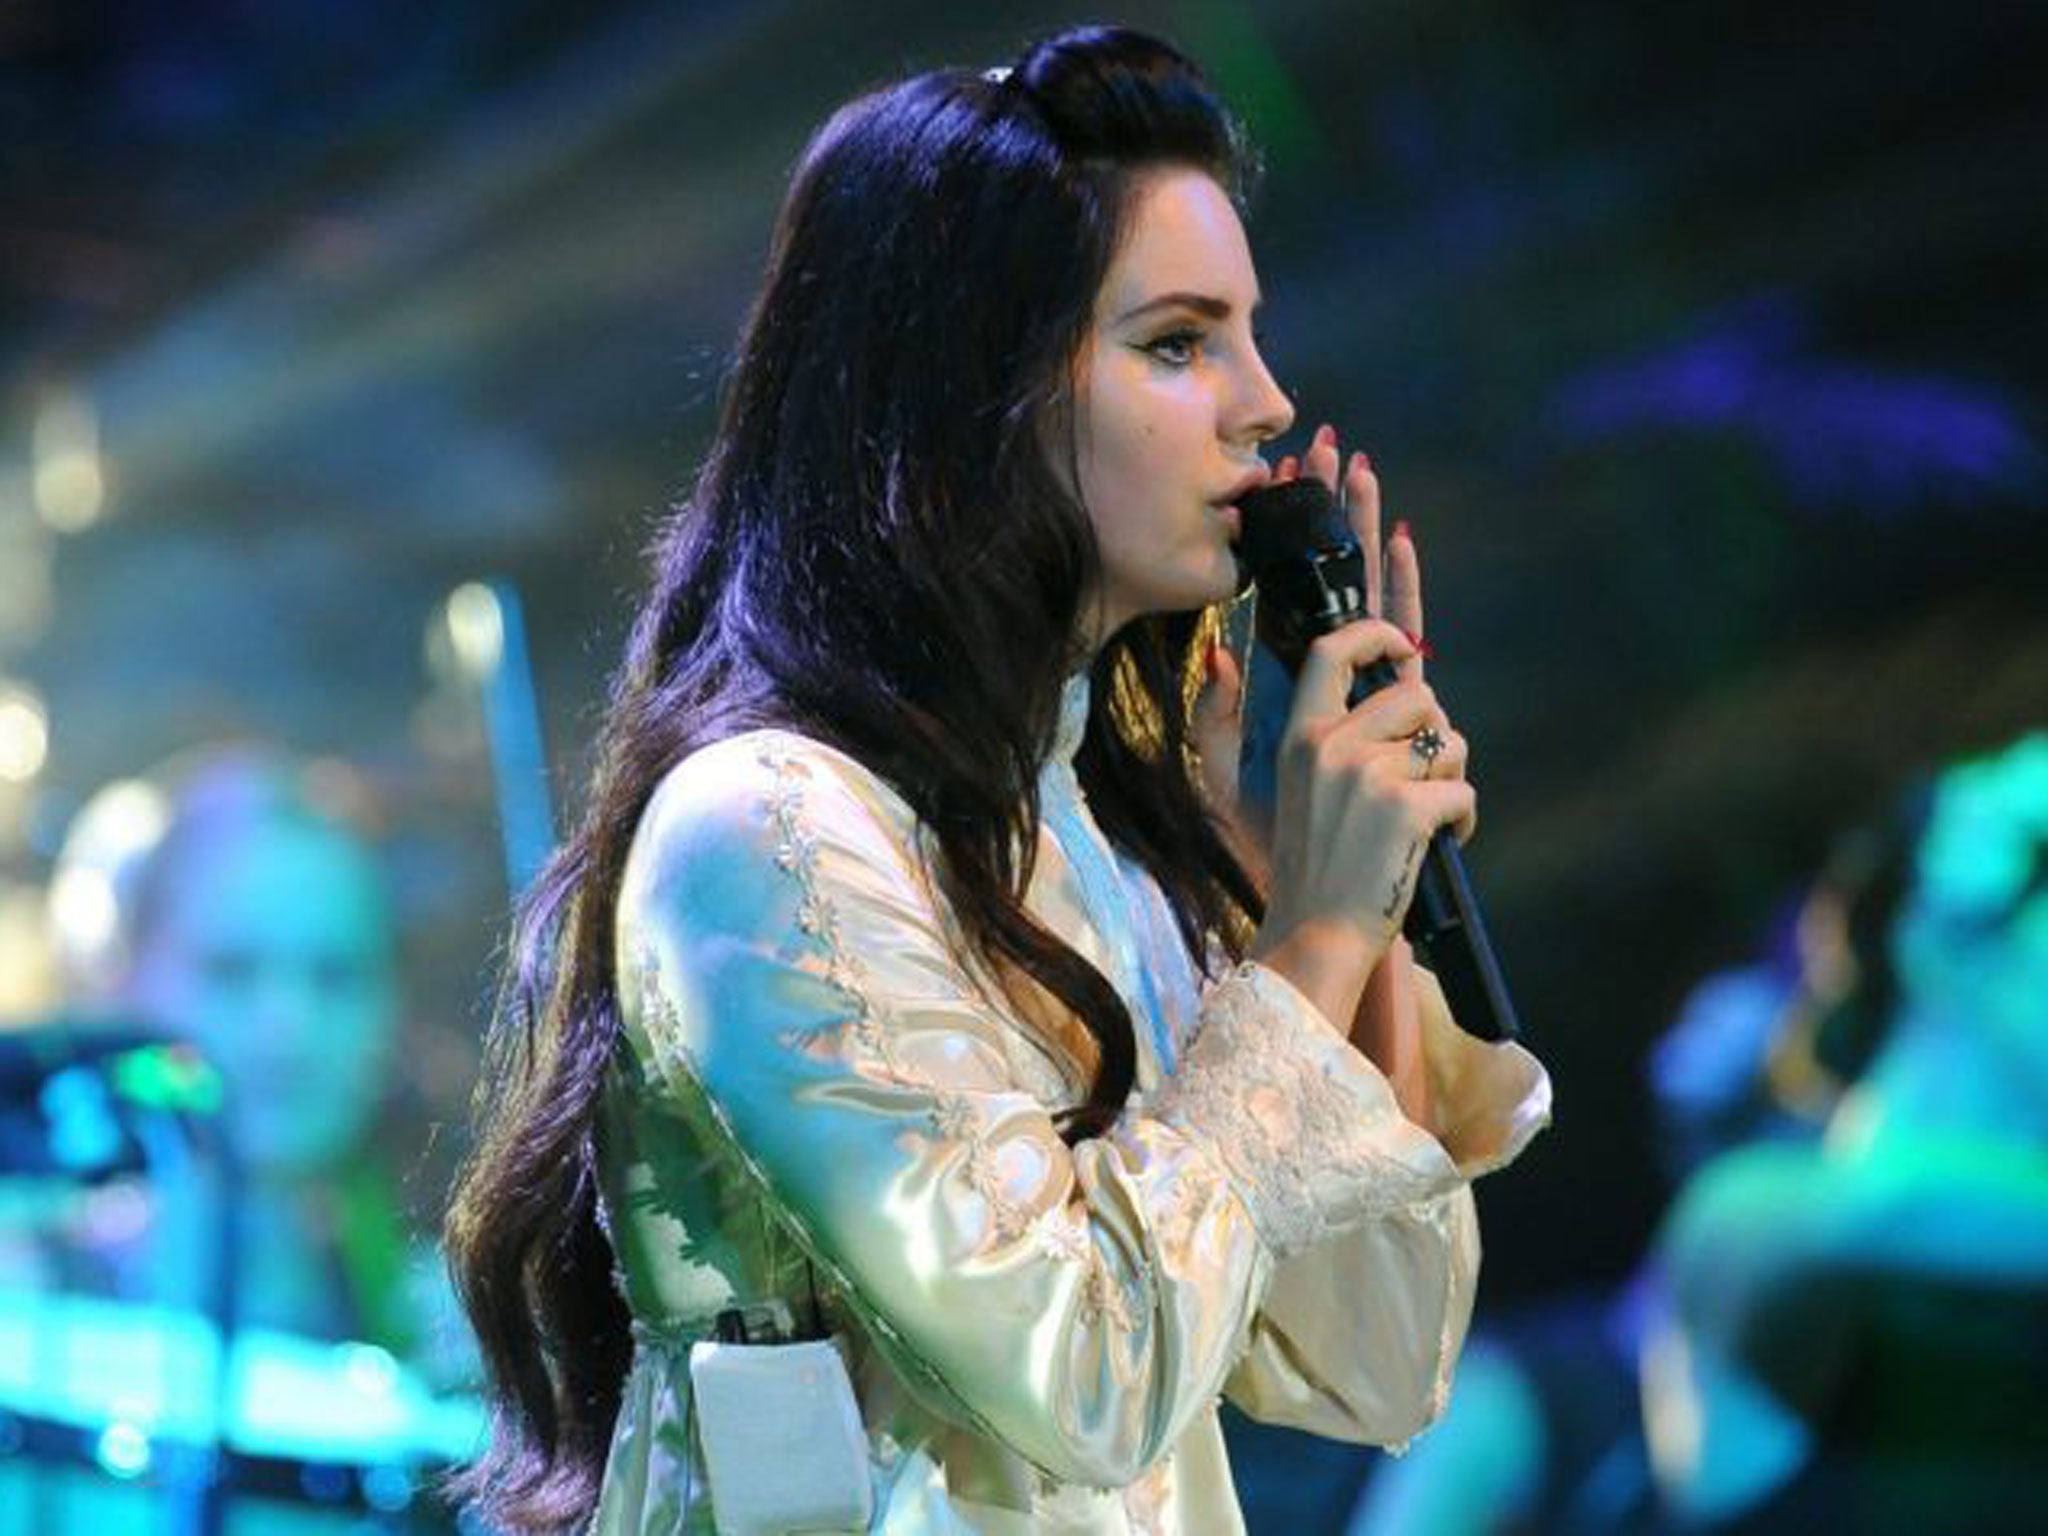 US singer Lana Del Rey performs during a concert held at the Velodrom arena in Berlin, Germany